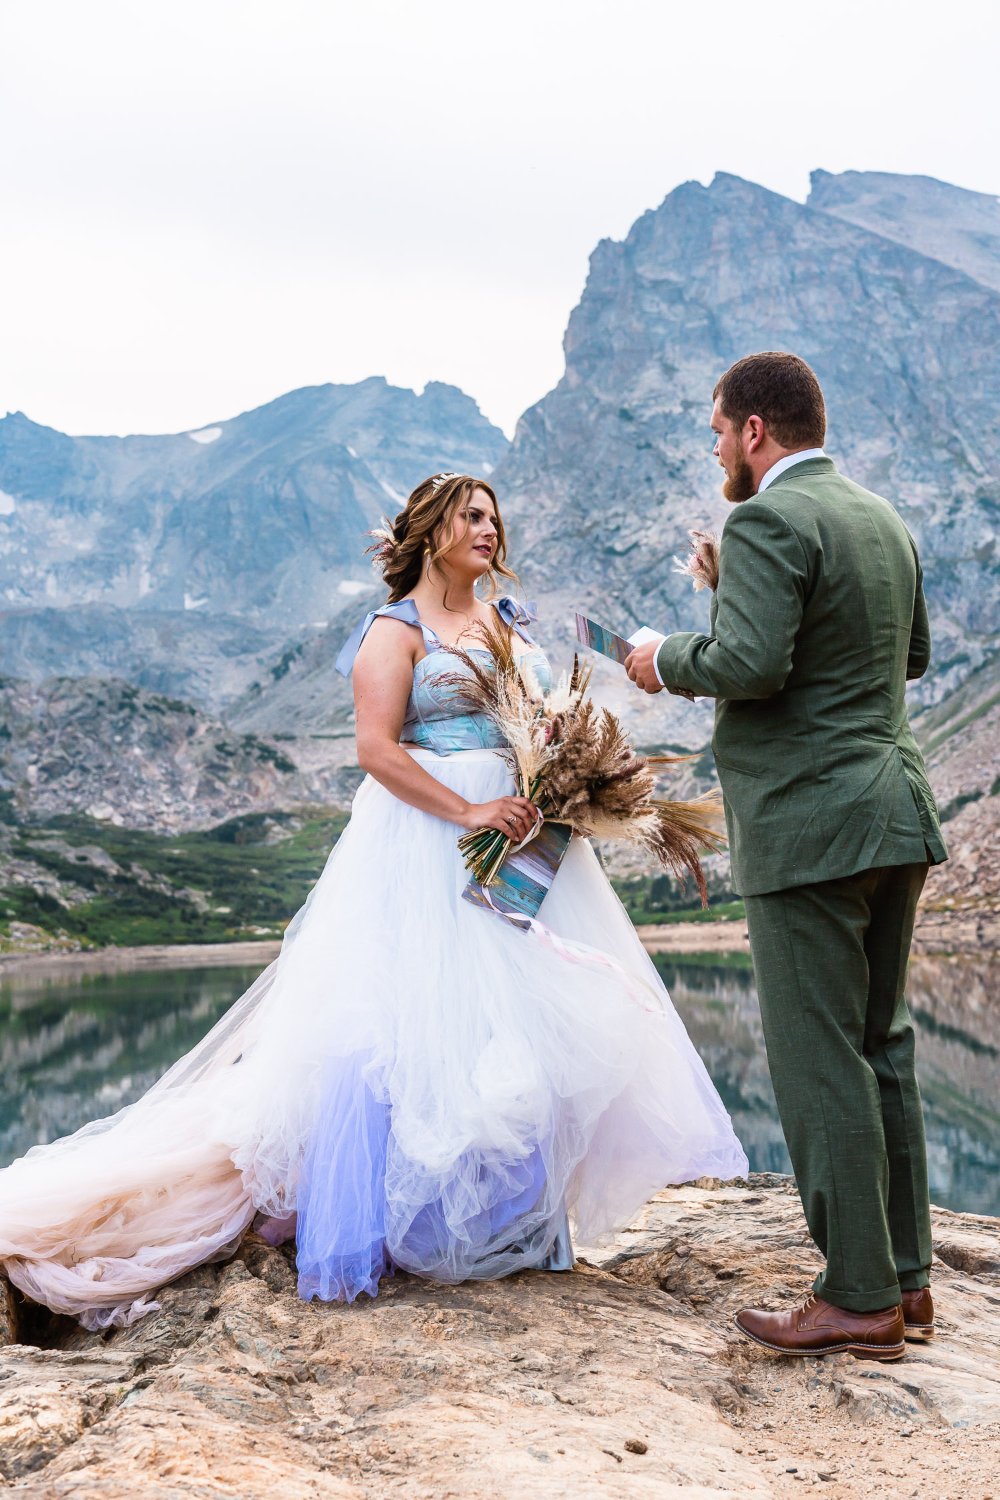 Elopement photos capture a bride and groom exchanging vows in front of a breathtaking mountain lake.